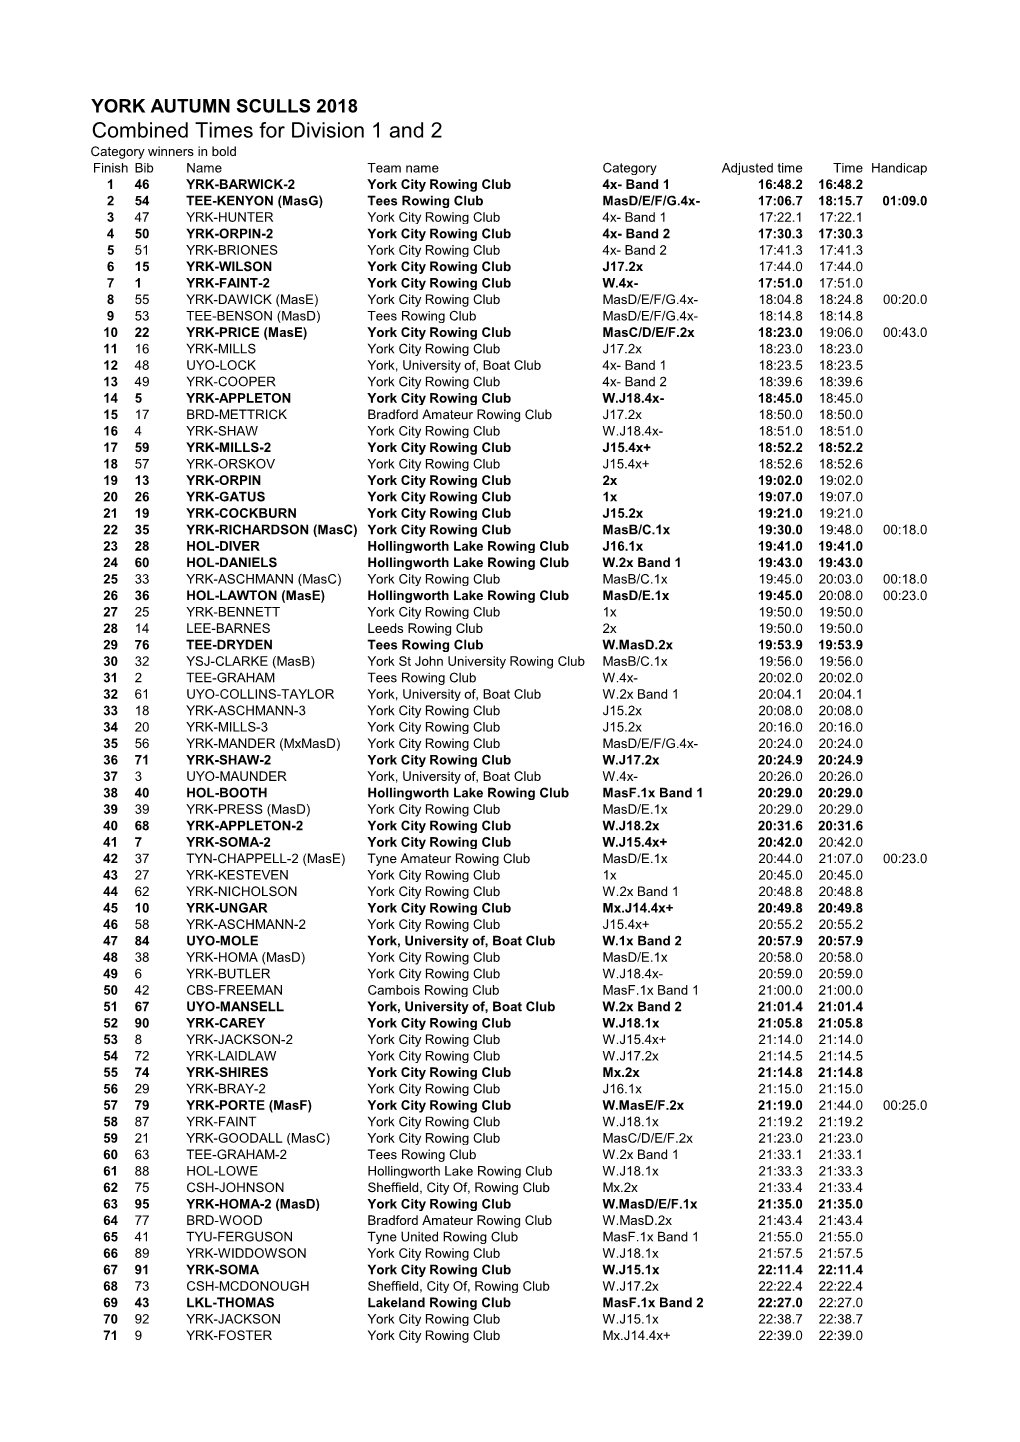 Combined Times for Division 1 and 2